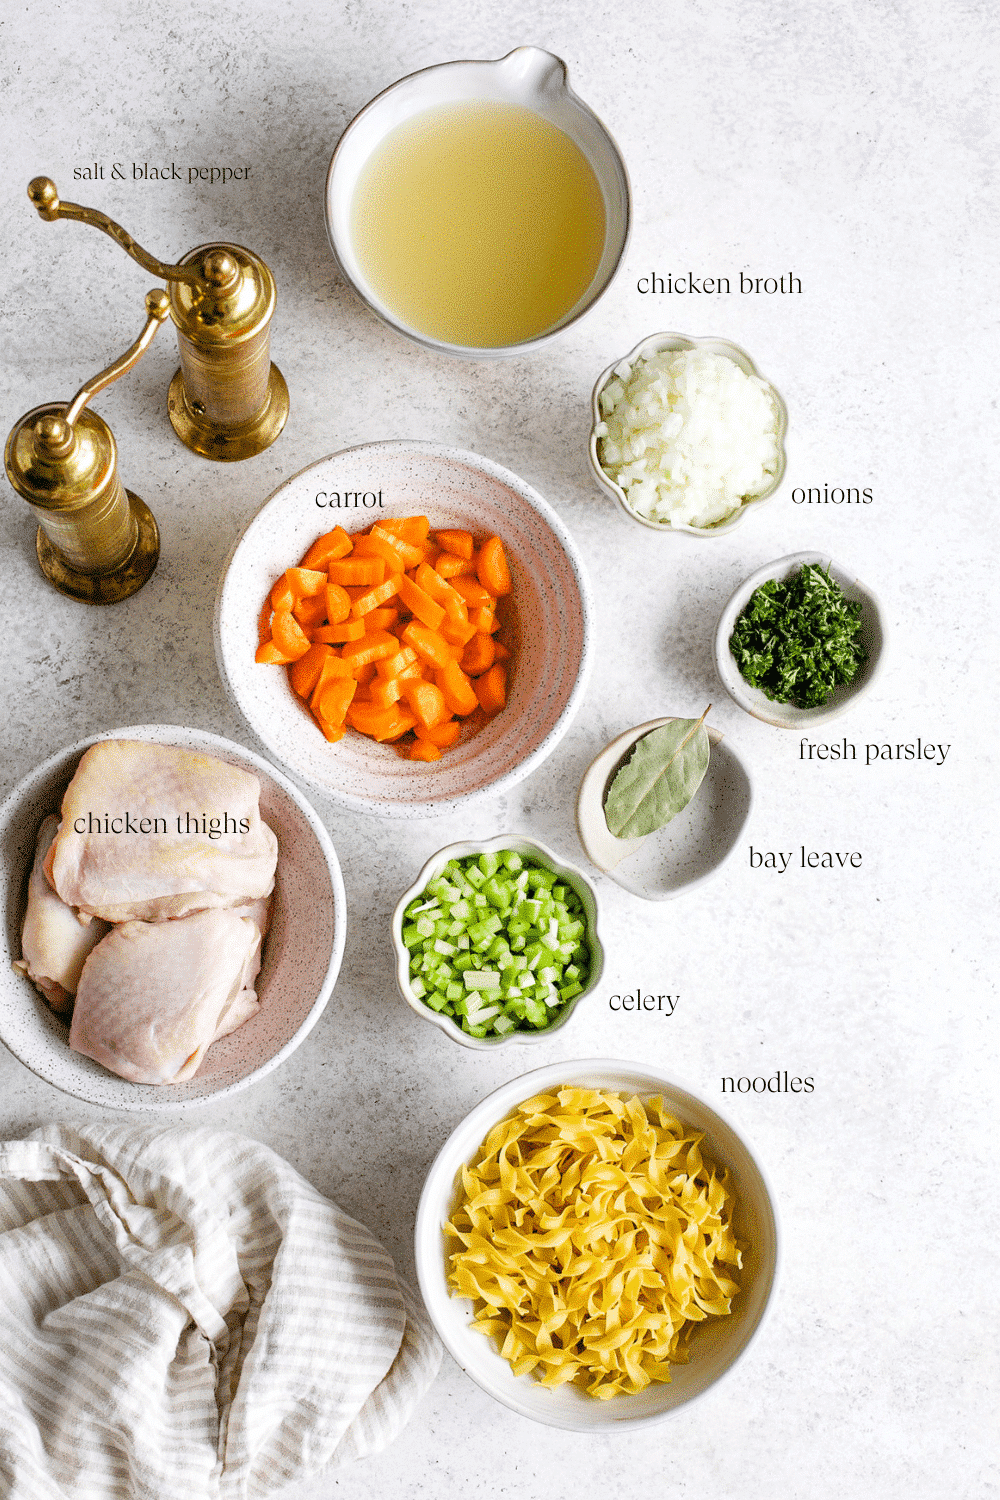 Ingredients for Instant Pot chicken noodle soup.